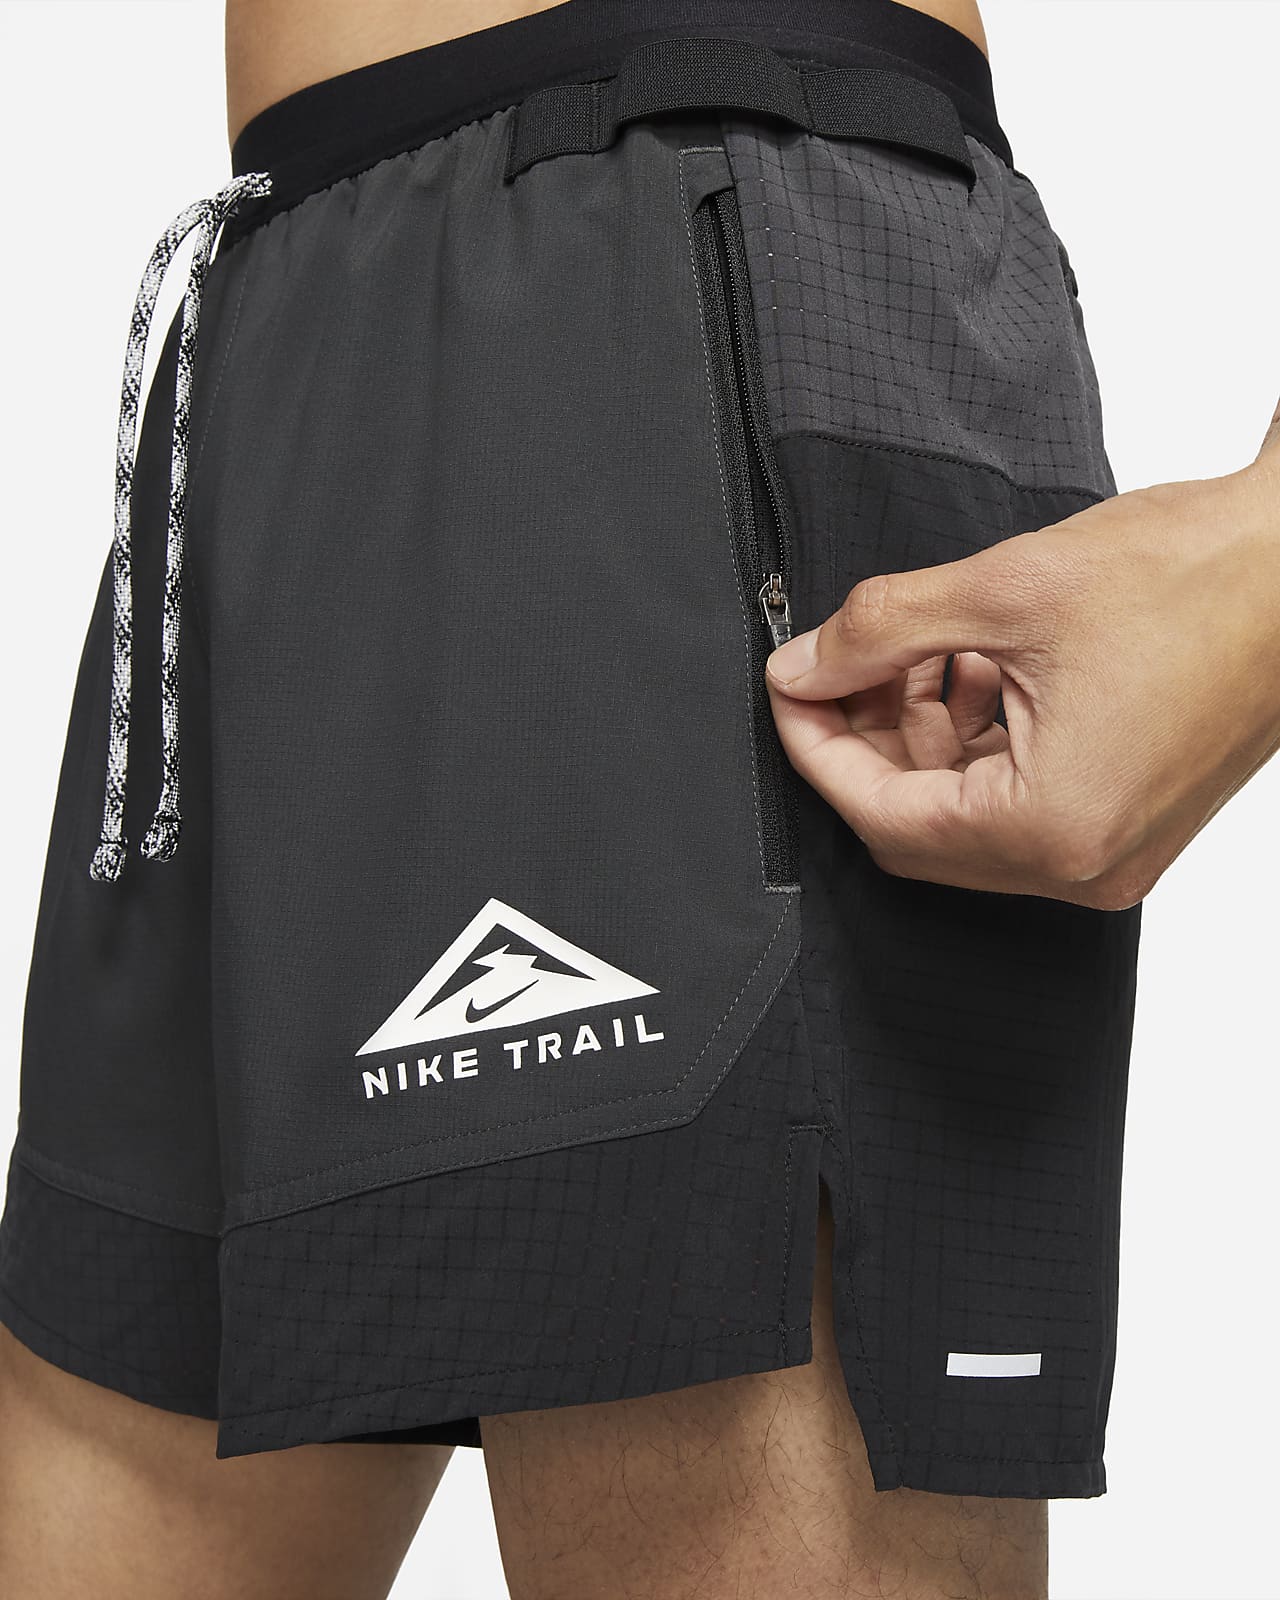 nike dri fit shorts with back zip pocket